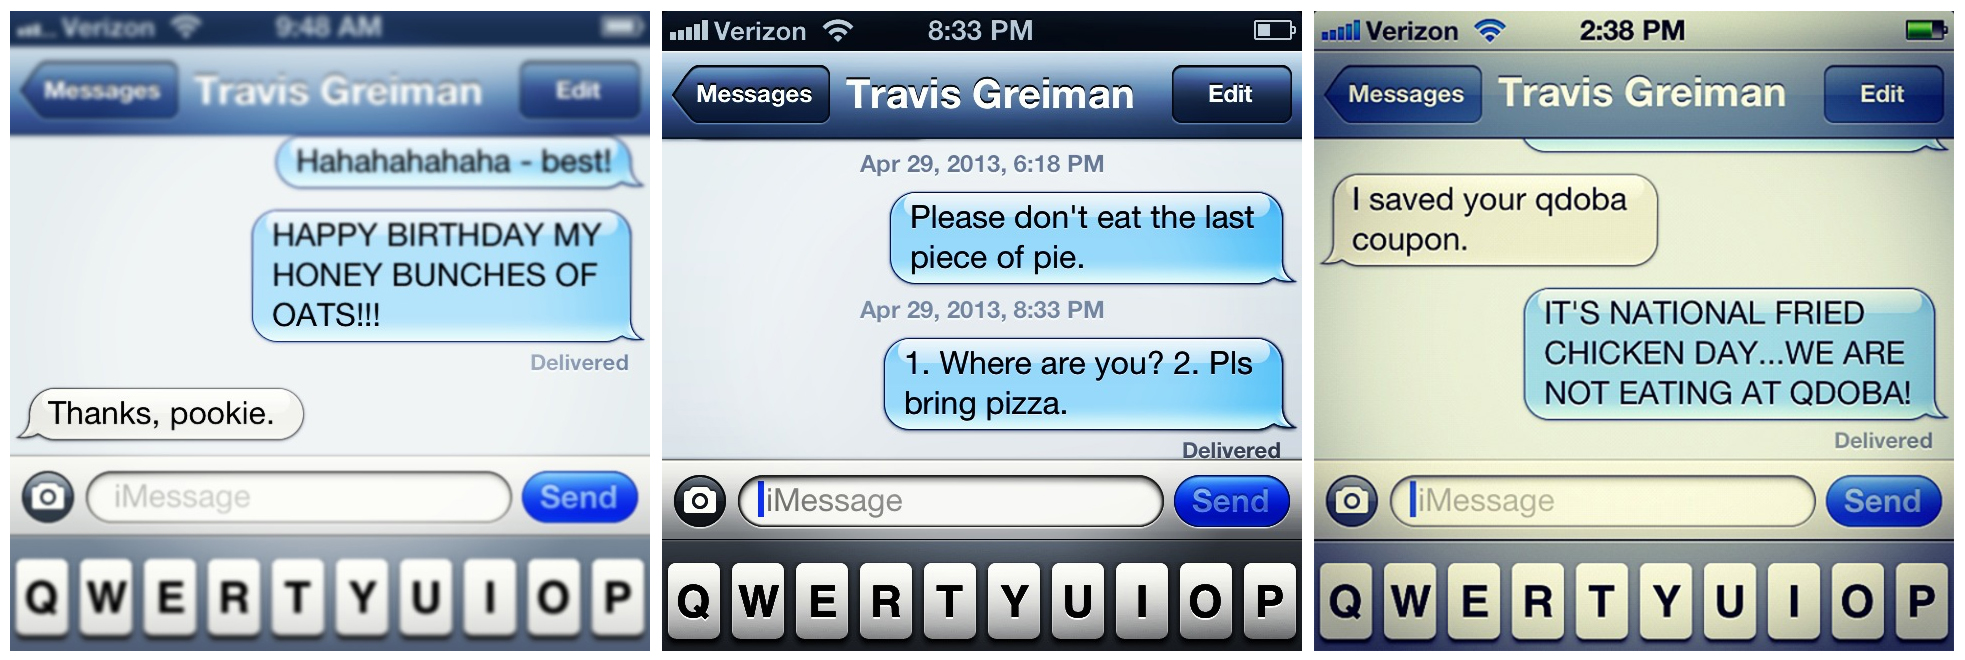 I had no idea how much I texted about food. Or how much I yelled about it.